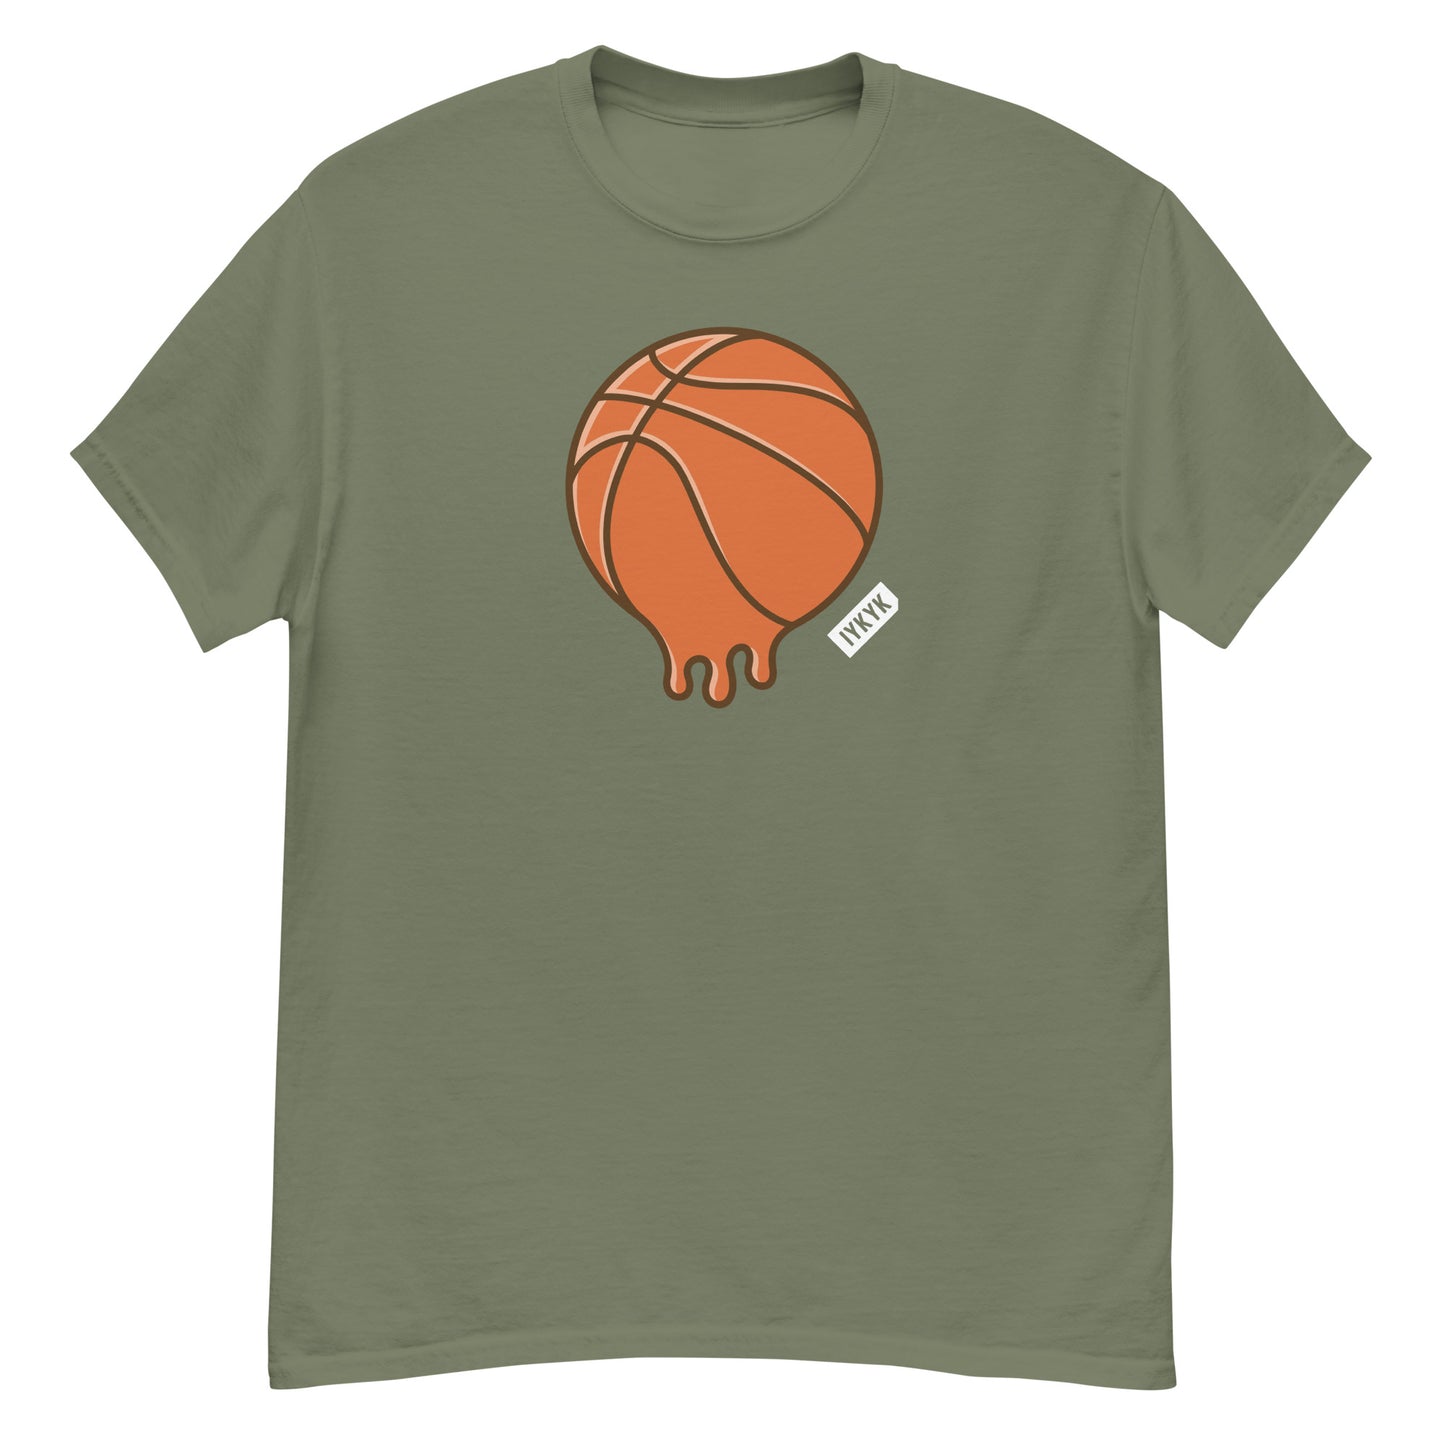 Classic Everyday Melting Basketball Just For Fun Tee